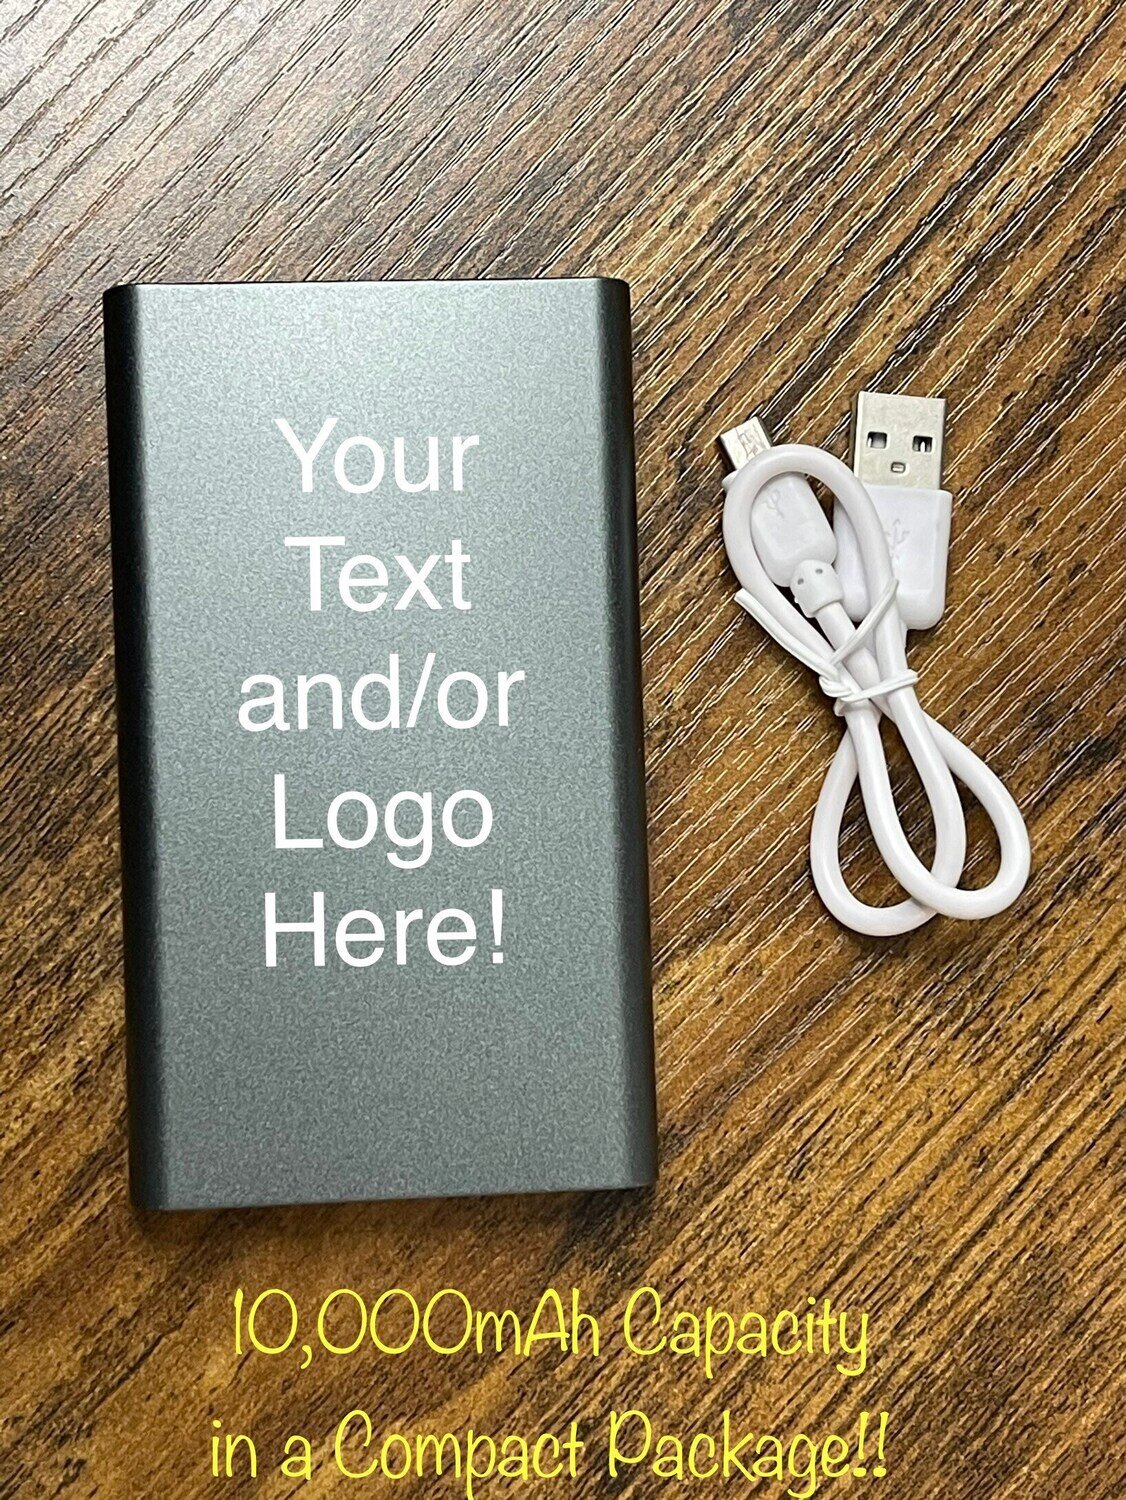 Custom Aluminum 1000mAh Power Bank Customized With Any Text or Logo - UV Printed or Fiber Laser Engraved